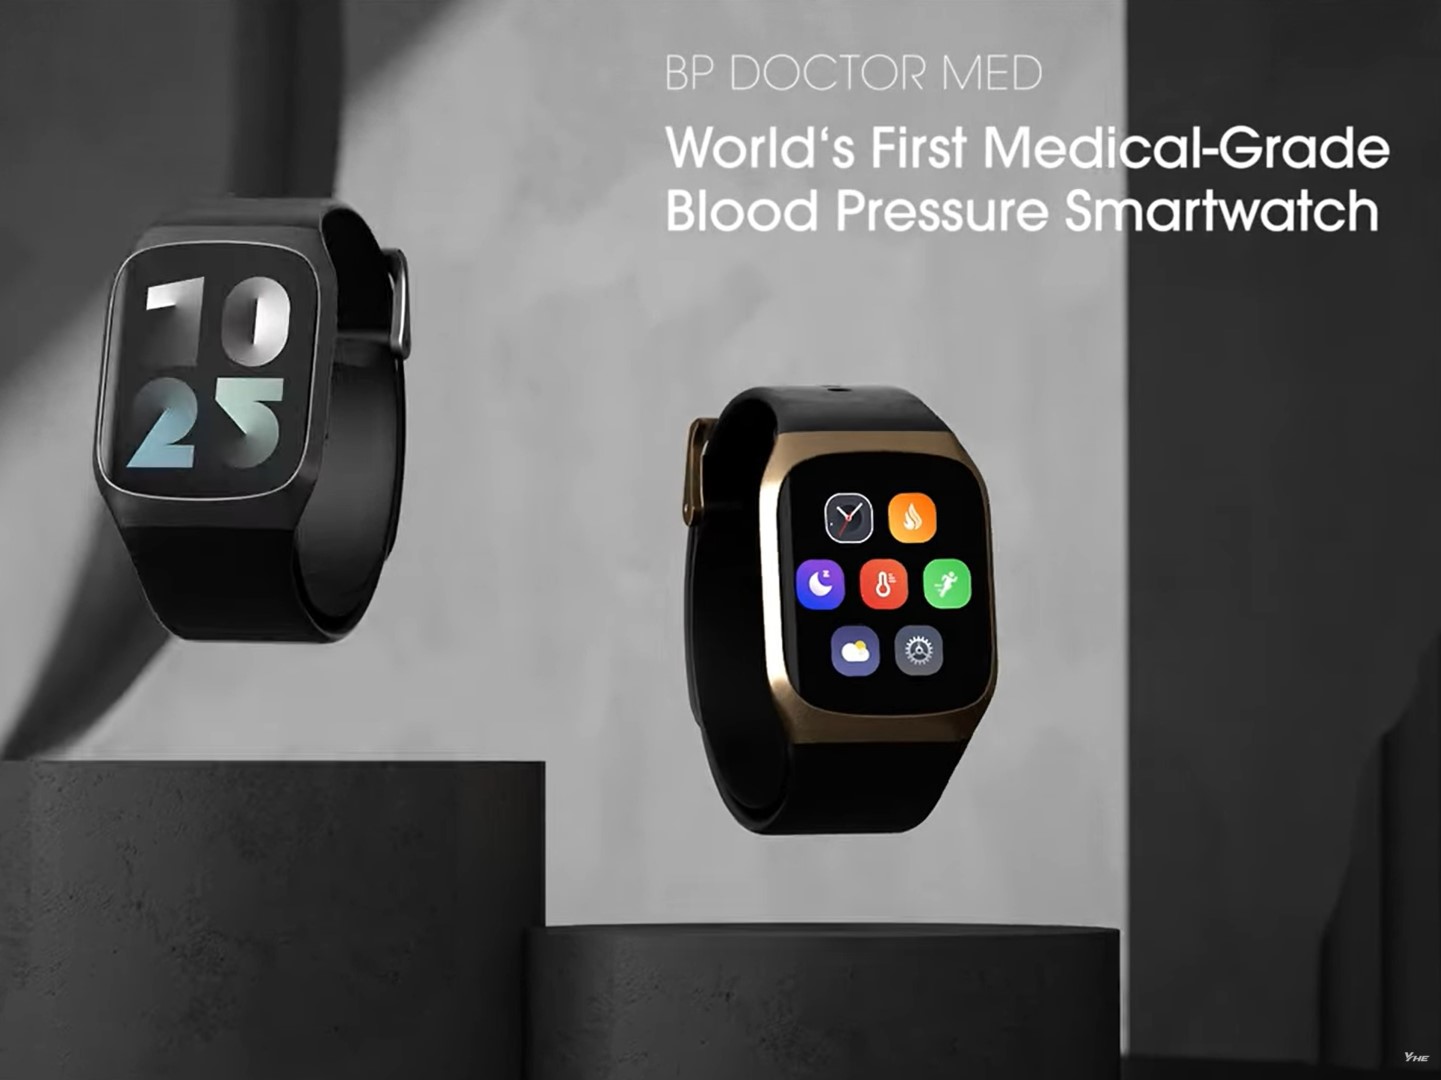 YHE BP Doctor Pro in test: smartwatch with blood pressure measurement